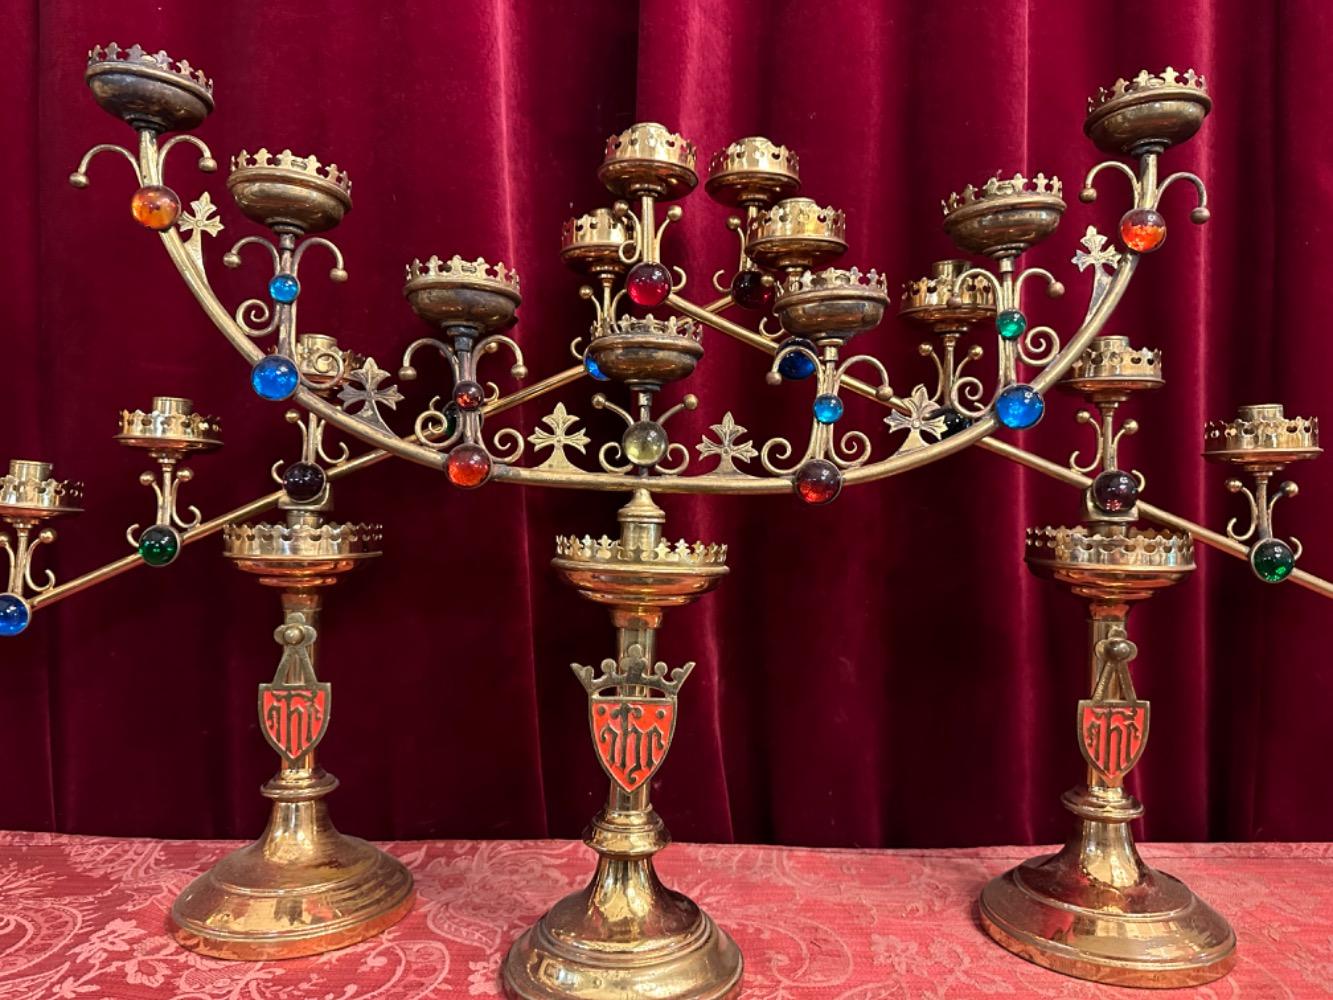 https://www.fluminalis.com/galleries/set-gothic-style-candle-holders-15323363-max.jpg